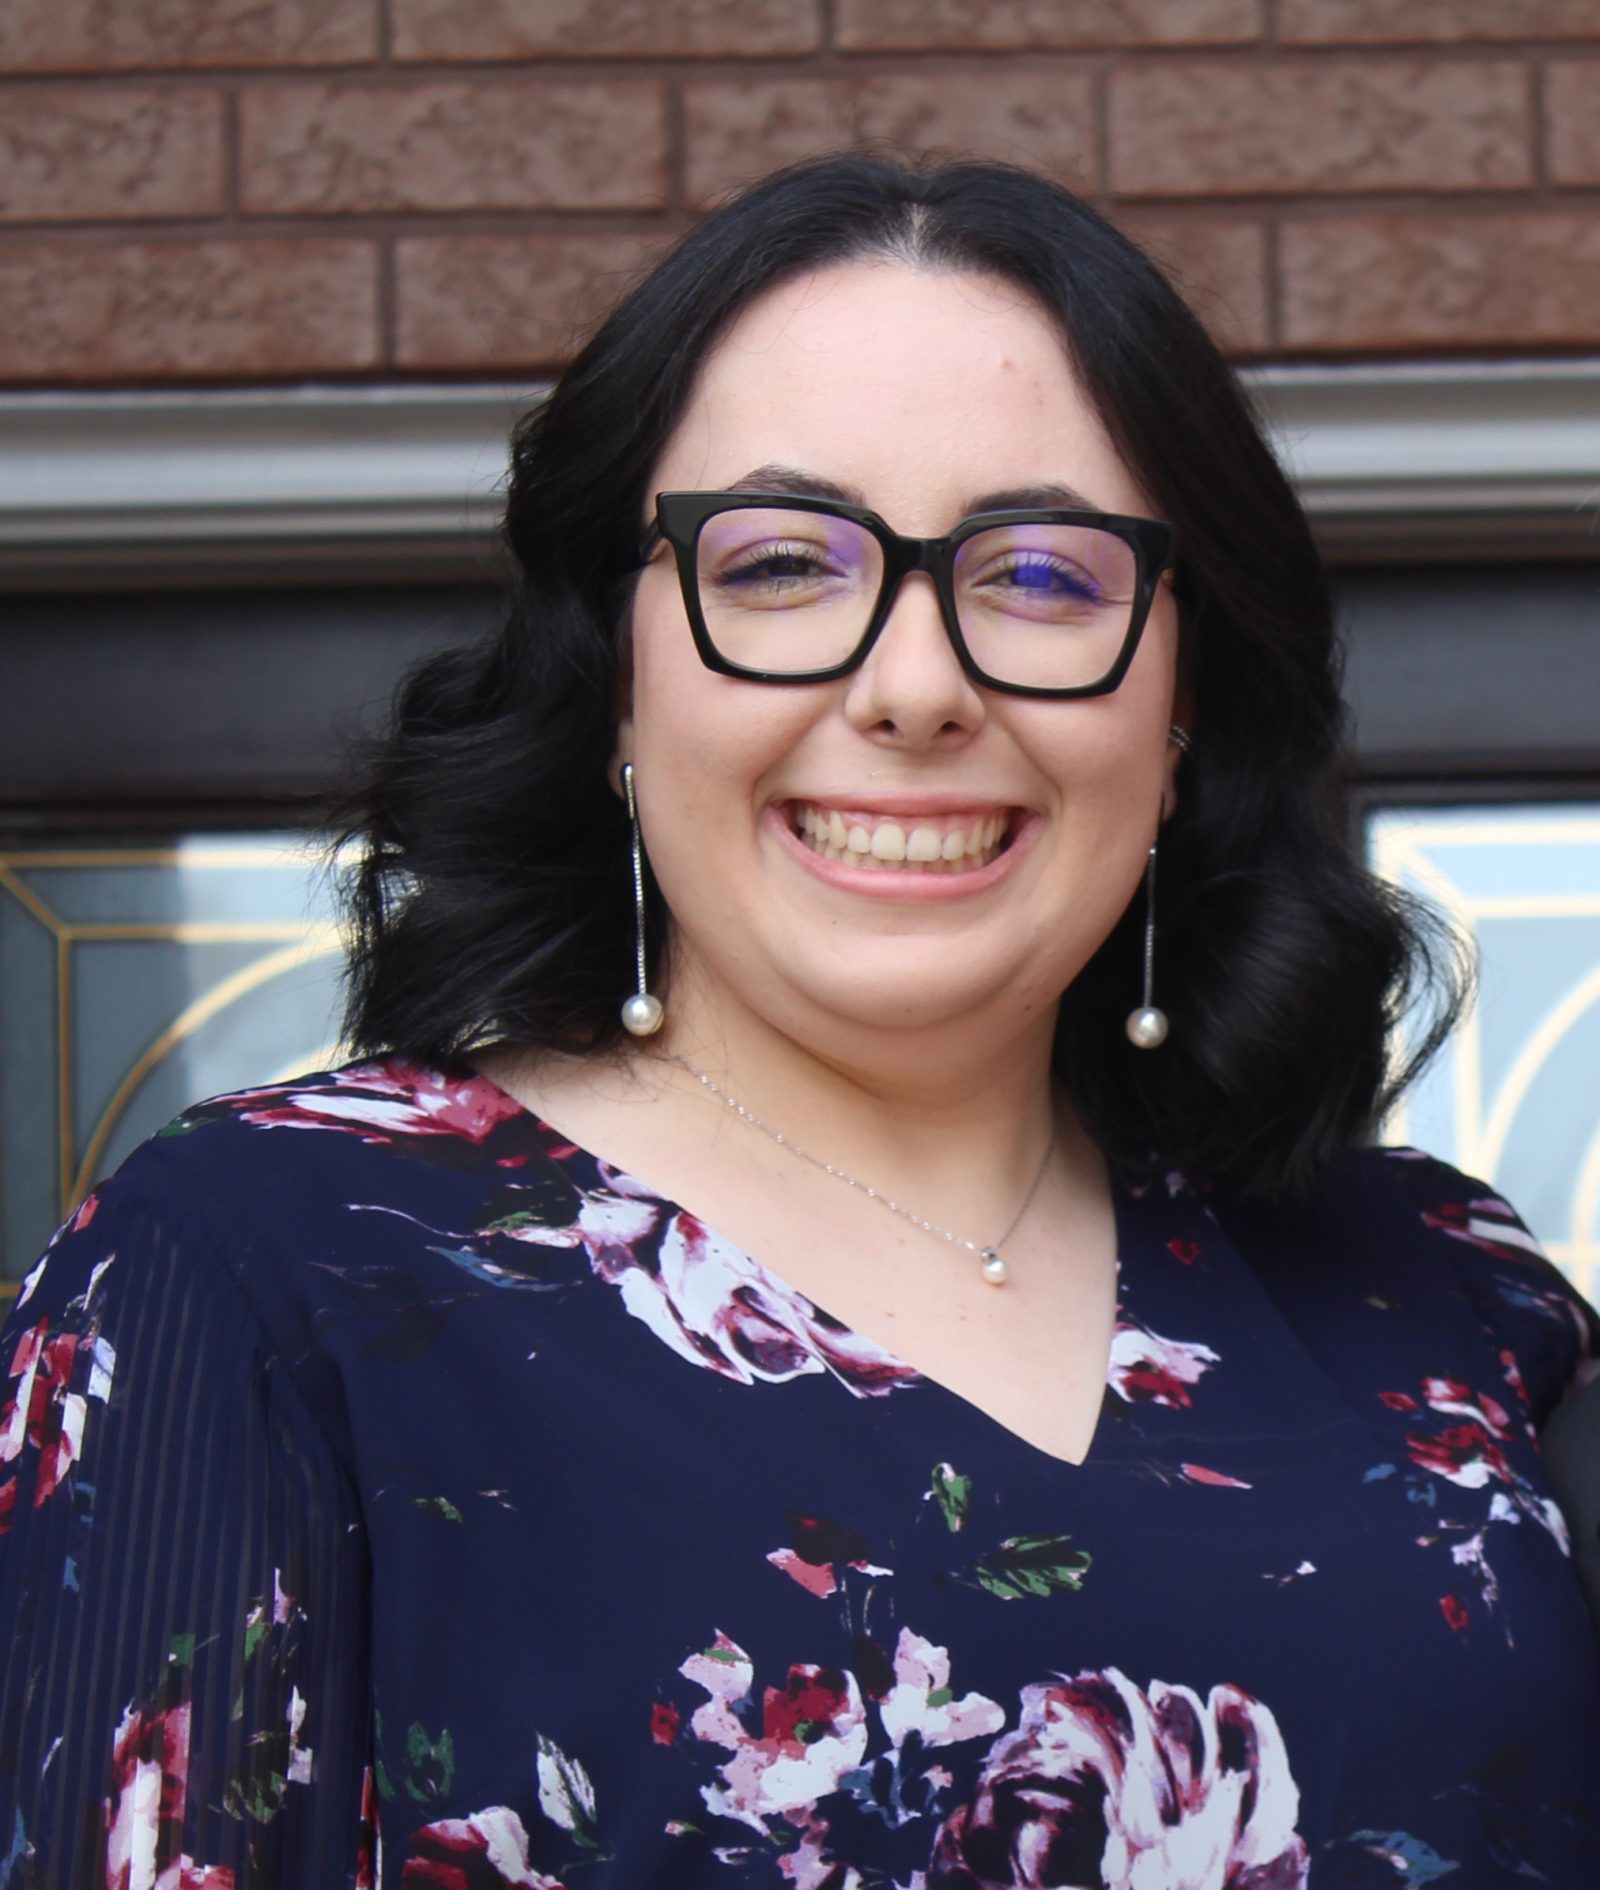 A portrait of Brock student Lucia Marchionda, who has long curled black hair and black thick-framed glasses. She is wearing a navy blue blouse with a pink floral print.